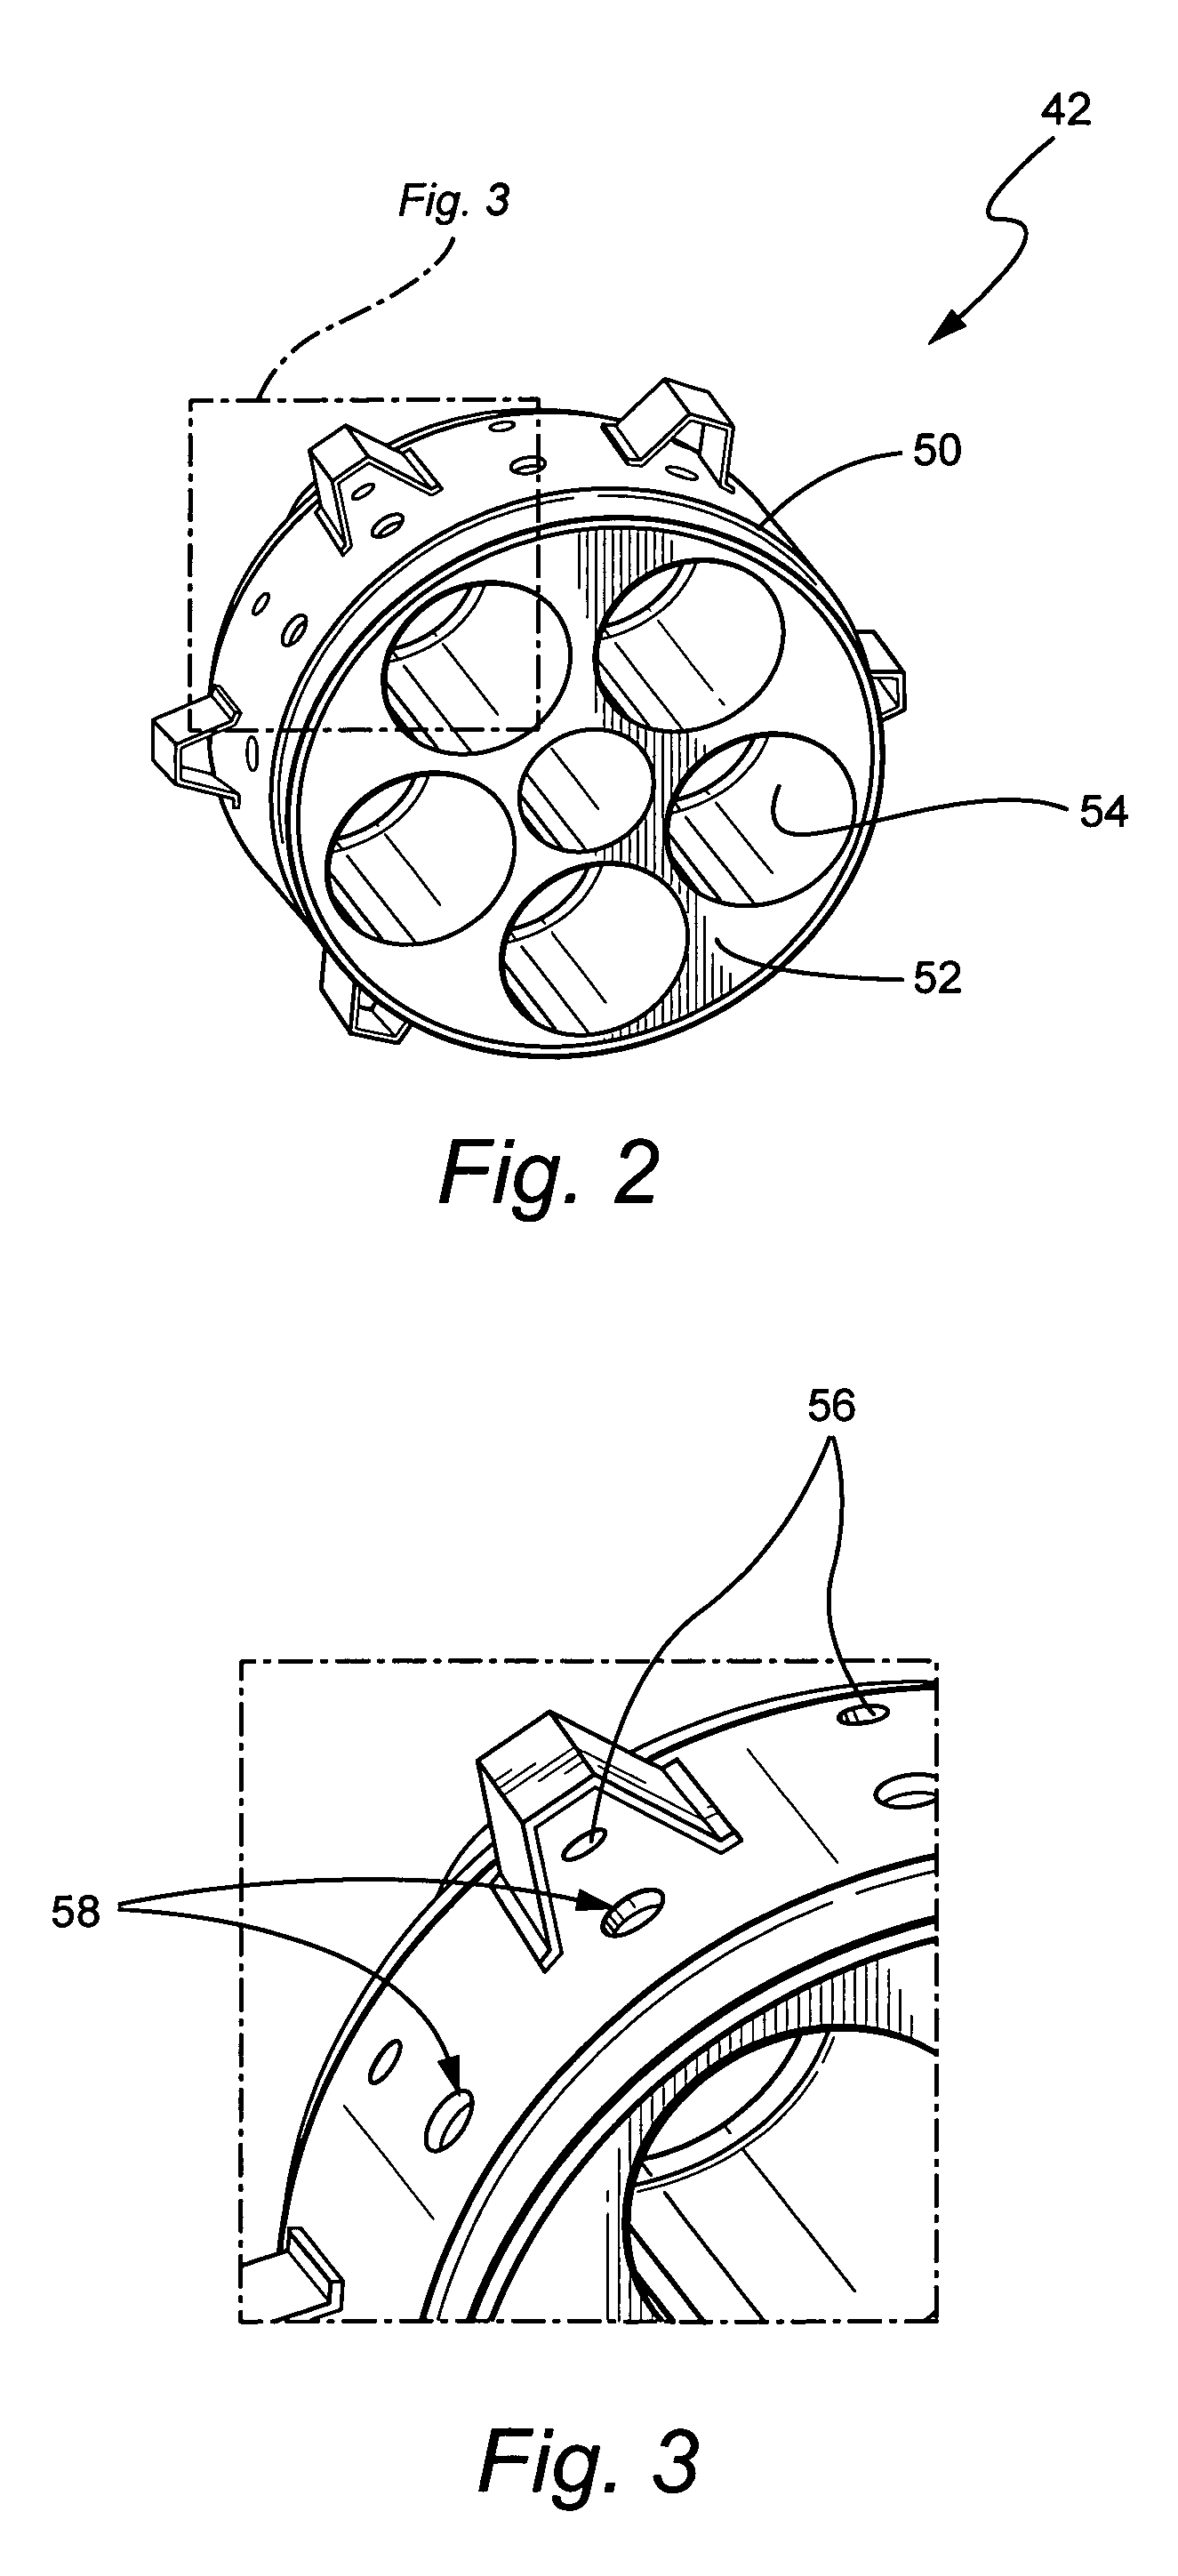 Combustion liner cap assembly for combustion dynamics reduction